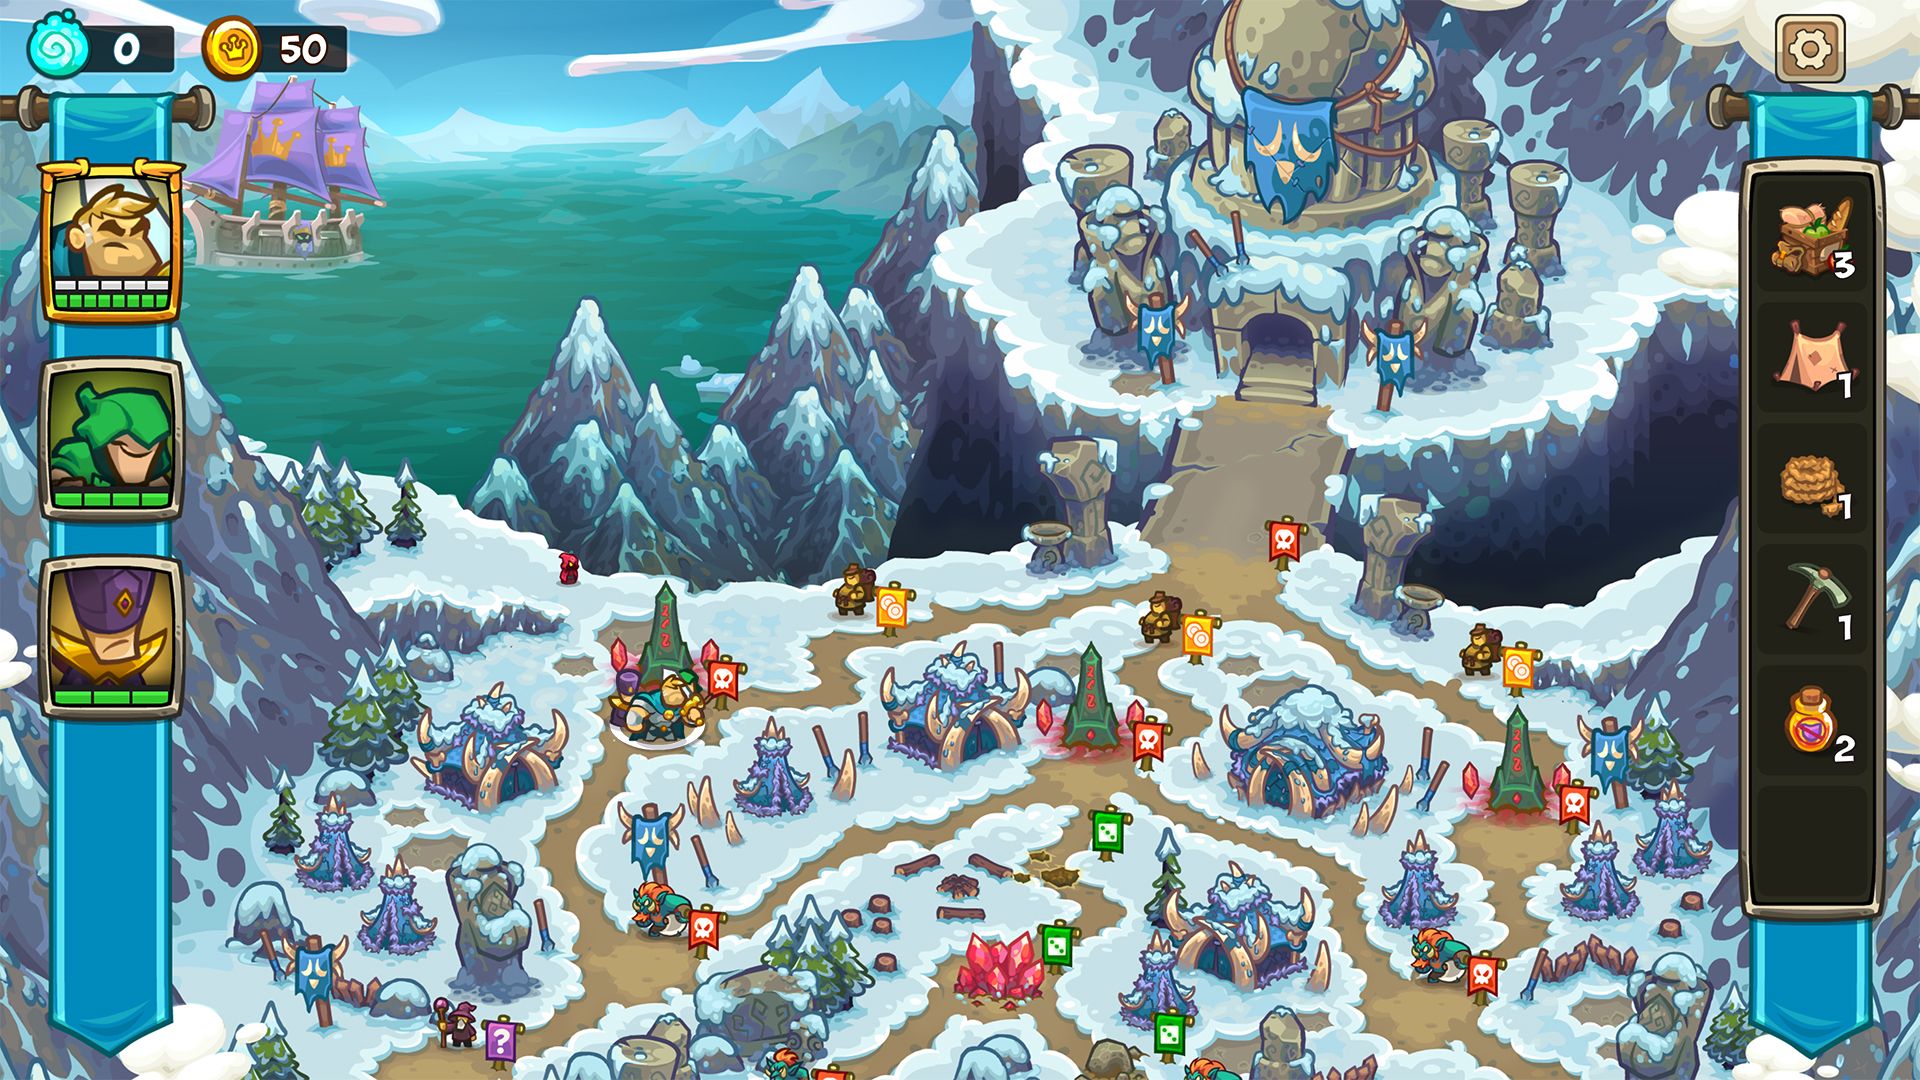 Screenshot from the game of an icy overworld map on a mountain leading to a large stone temple.